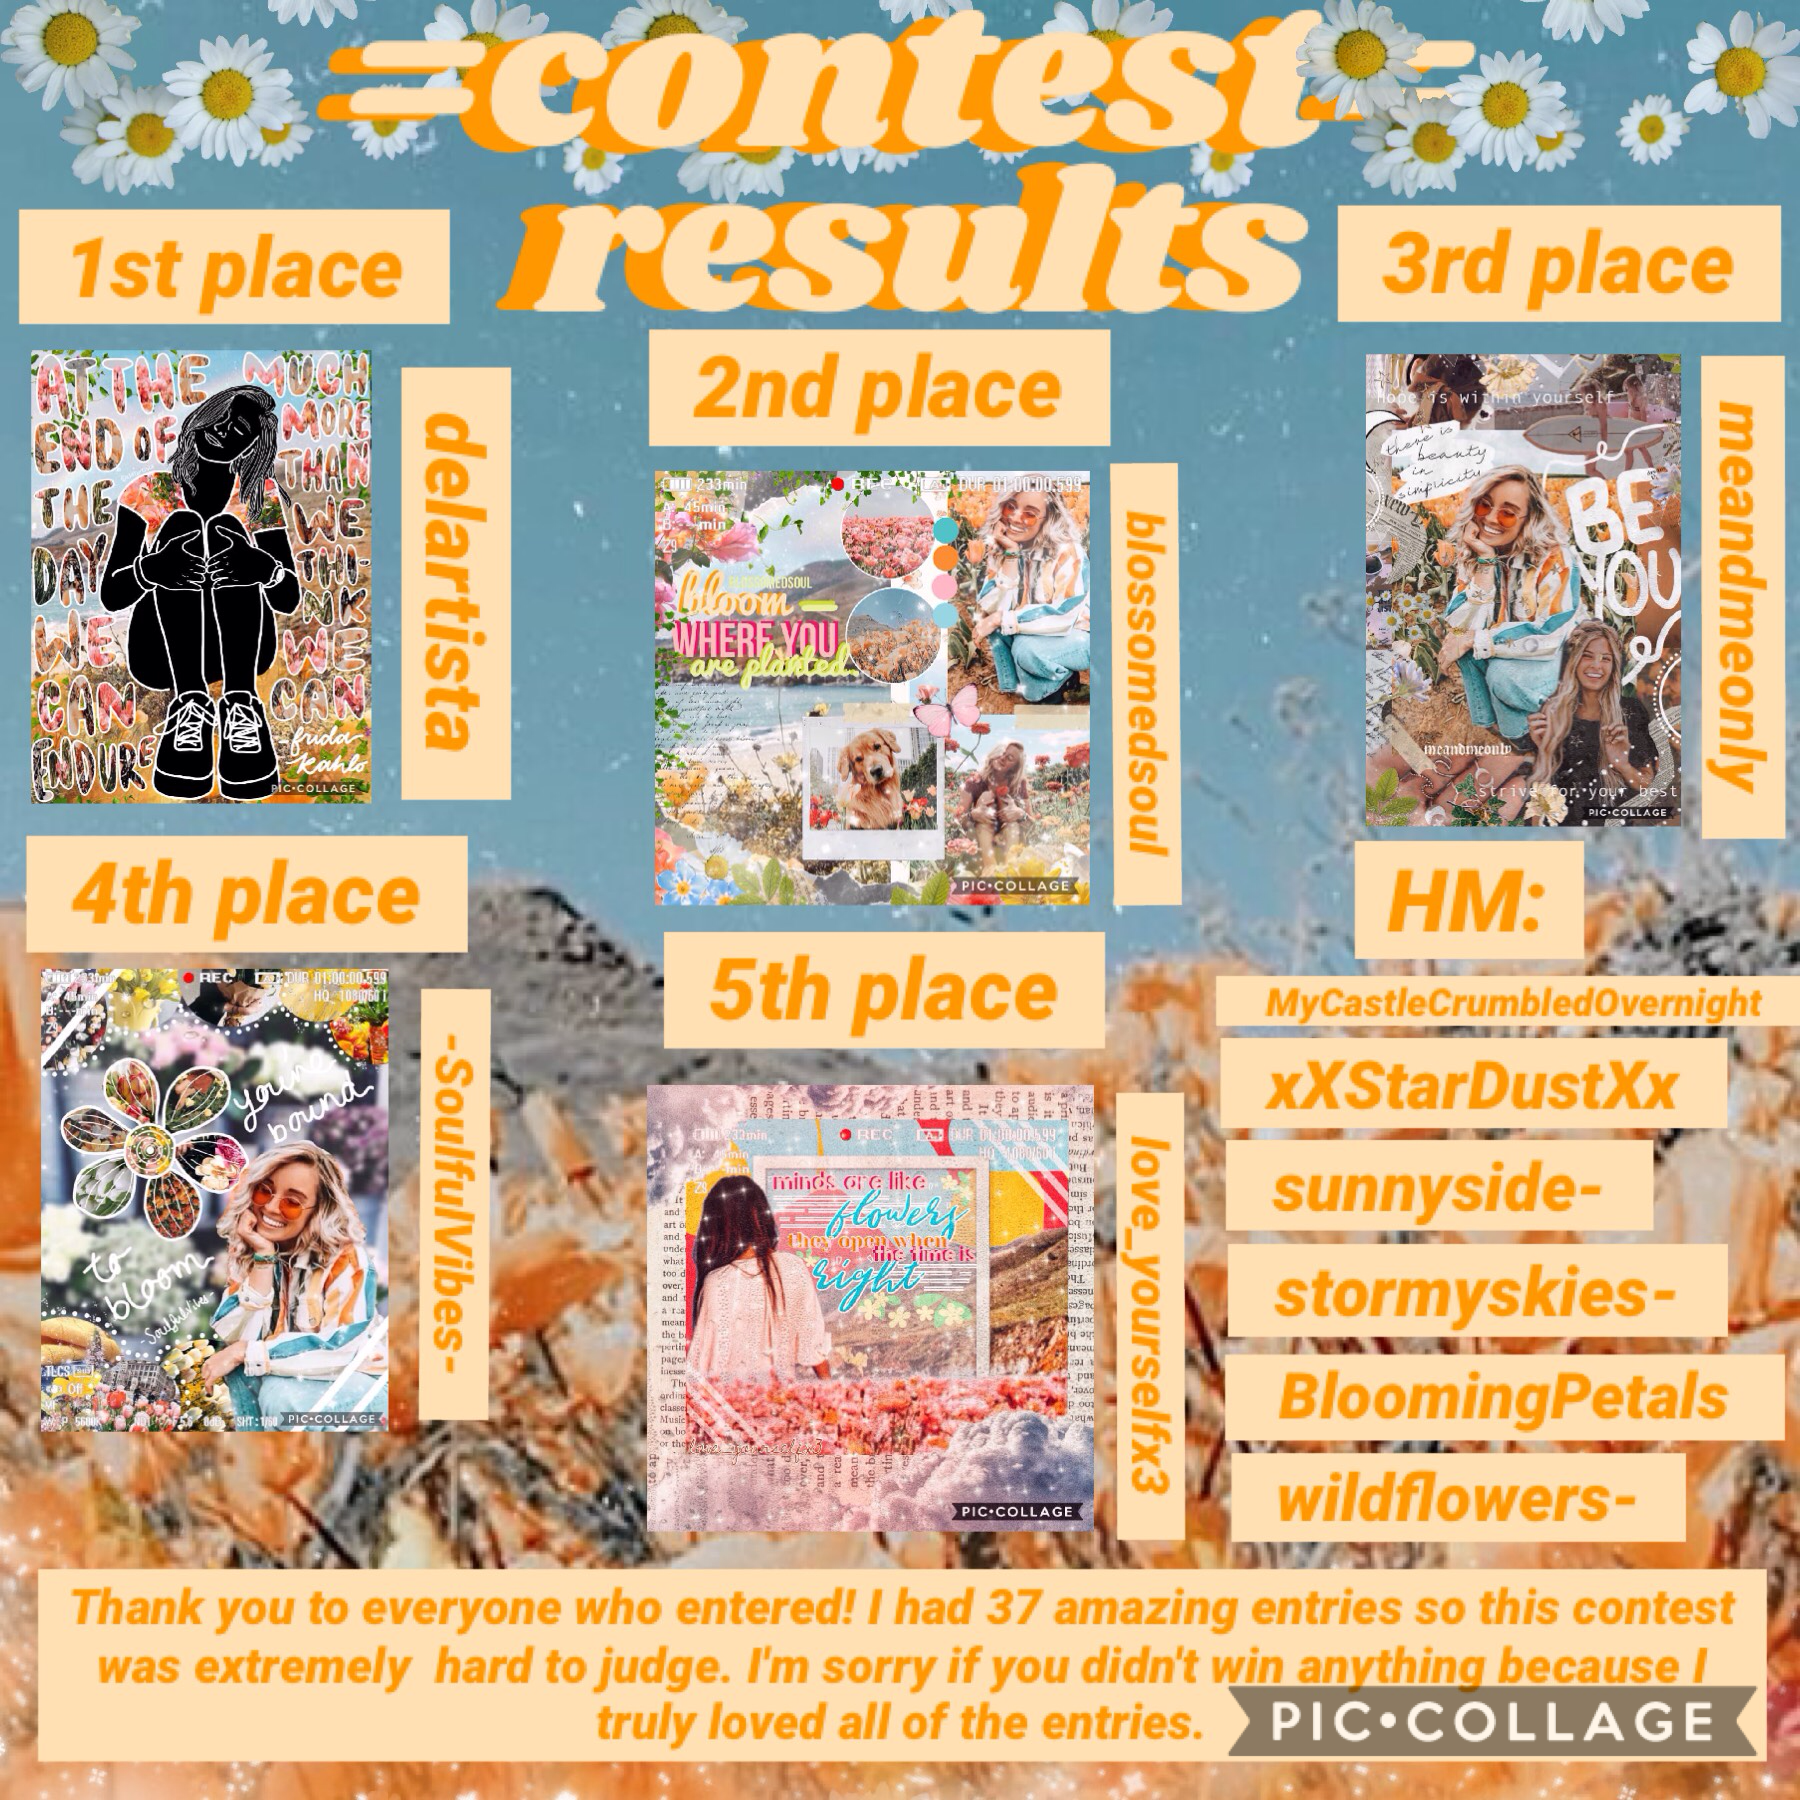 🌼T A P🌼
Congrats to all of the winners. I was really blown away by all the entries and I wasn't expecting so many!
Winners come get your prizes in the remixes! (I will try to finish soon but I'm a bit busy)